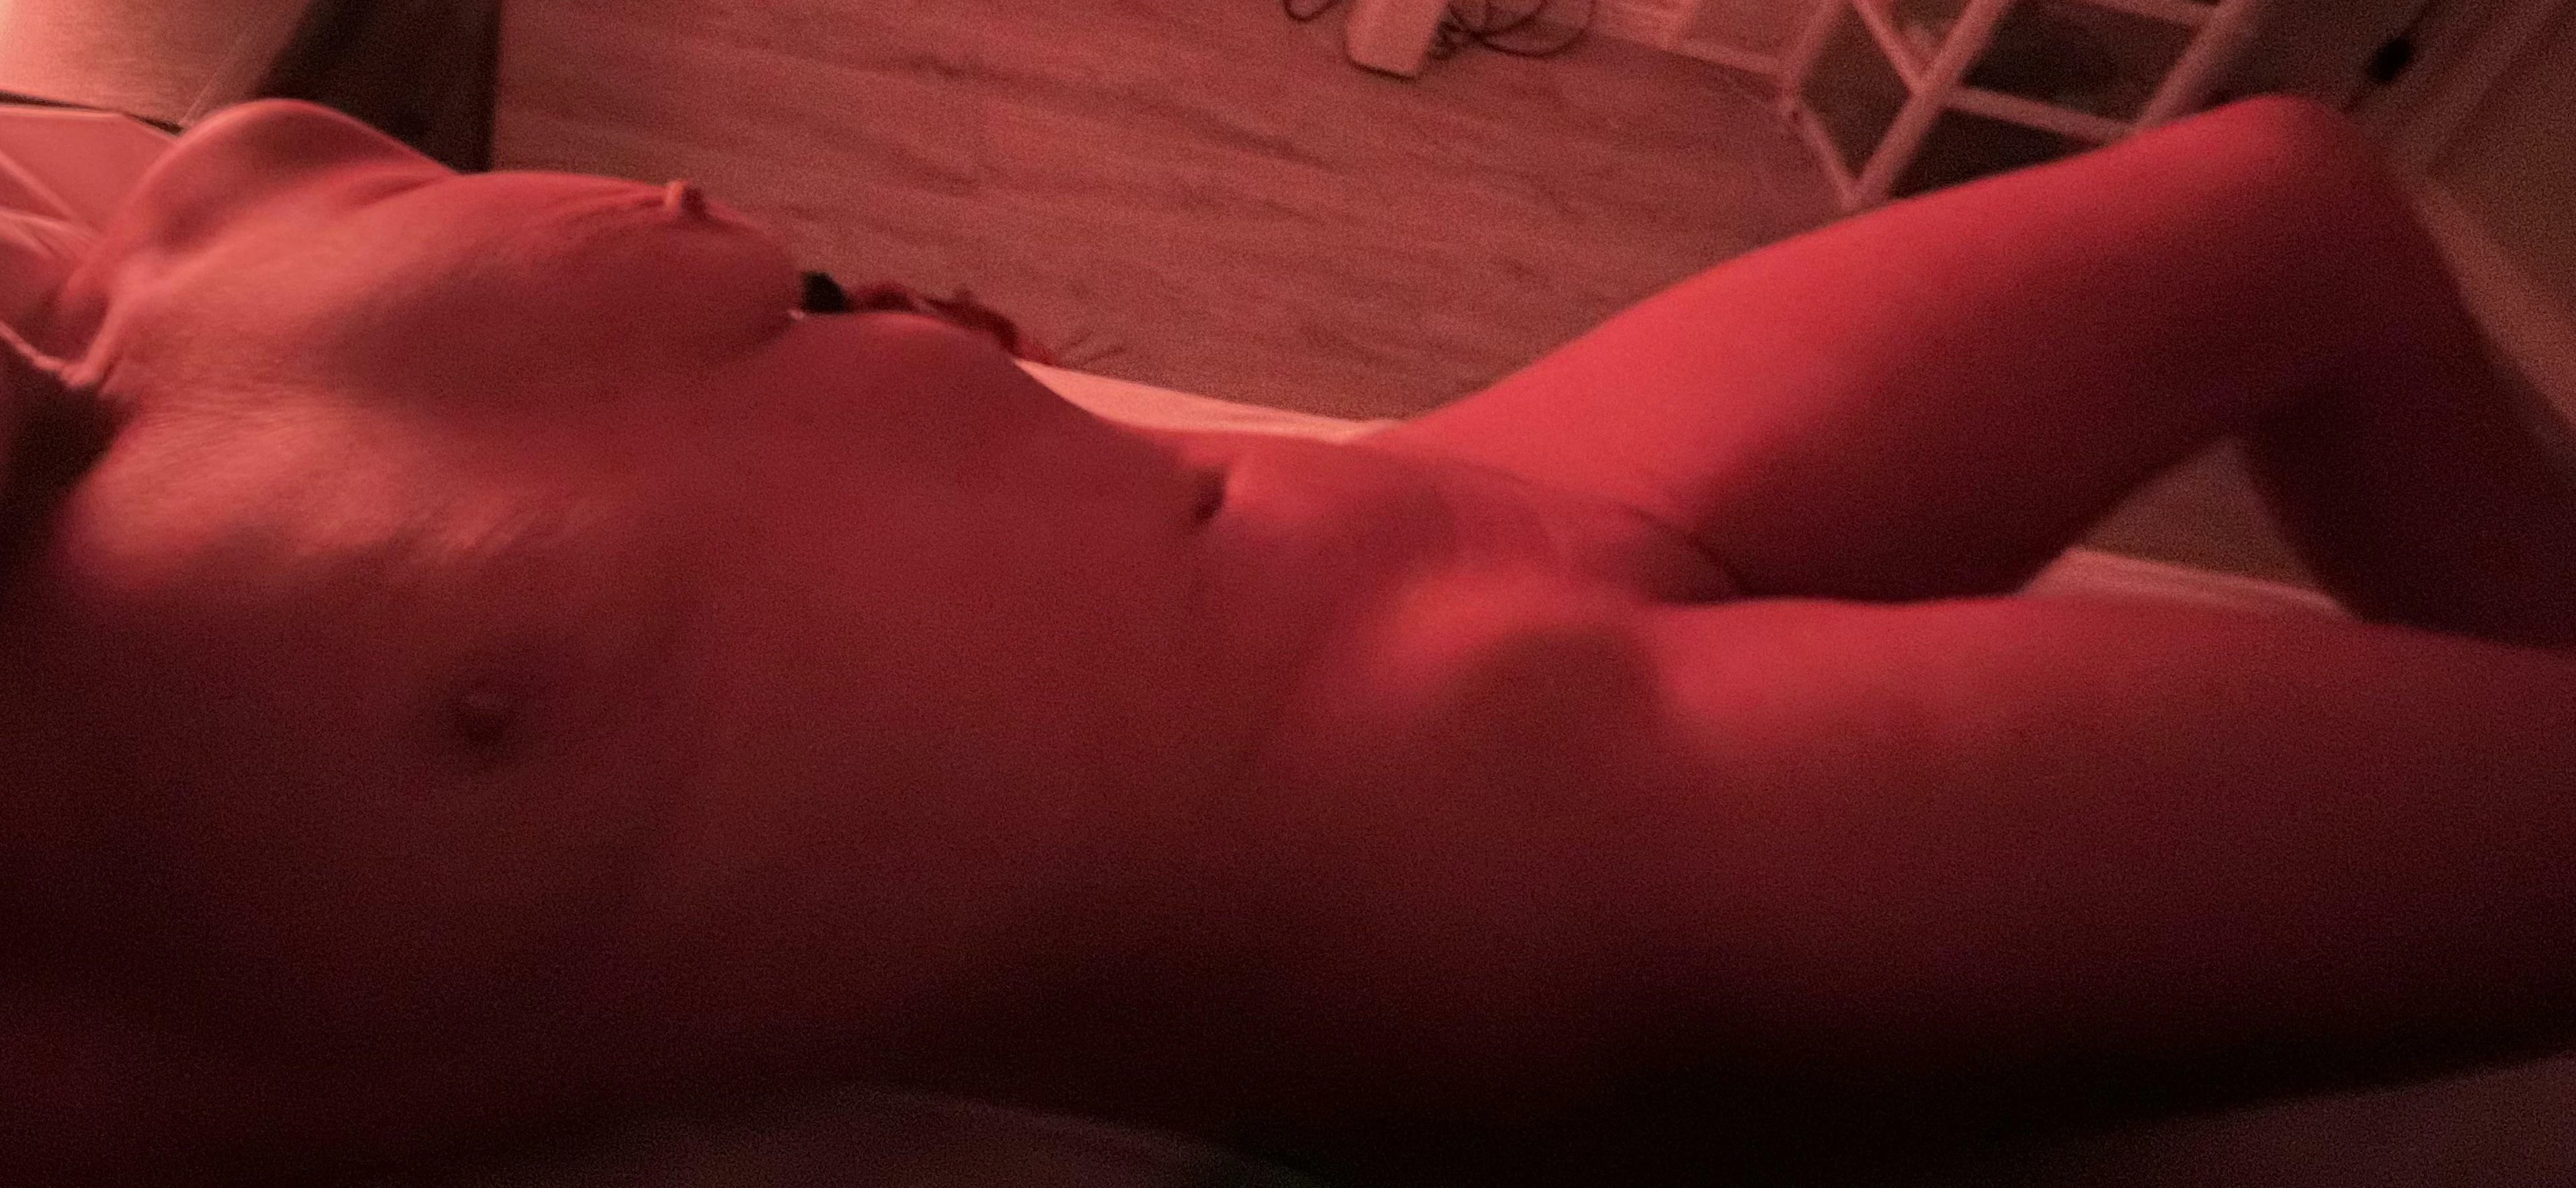 (f) Do I make you want to wake up and fuck me?!?